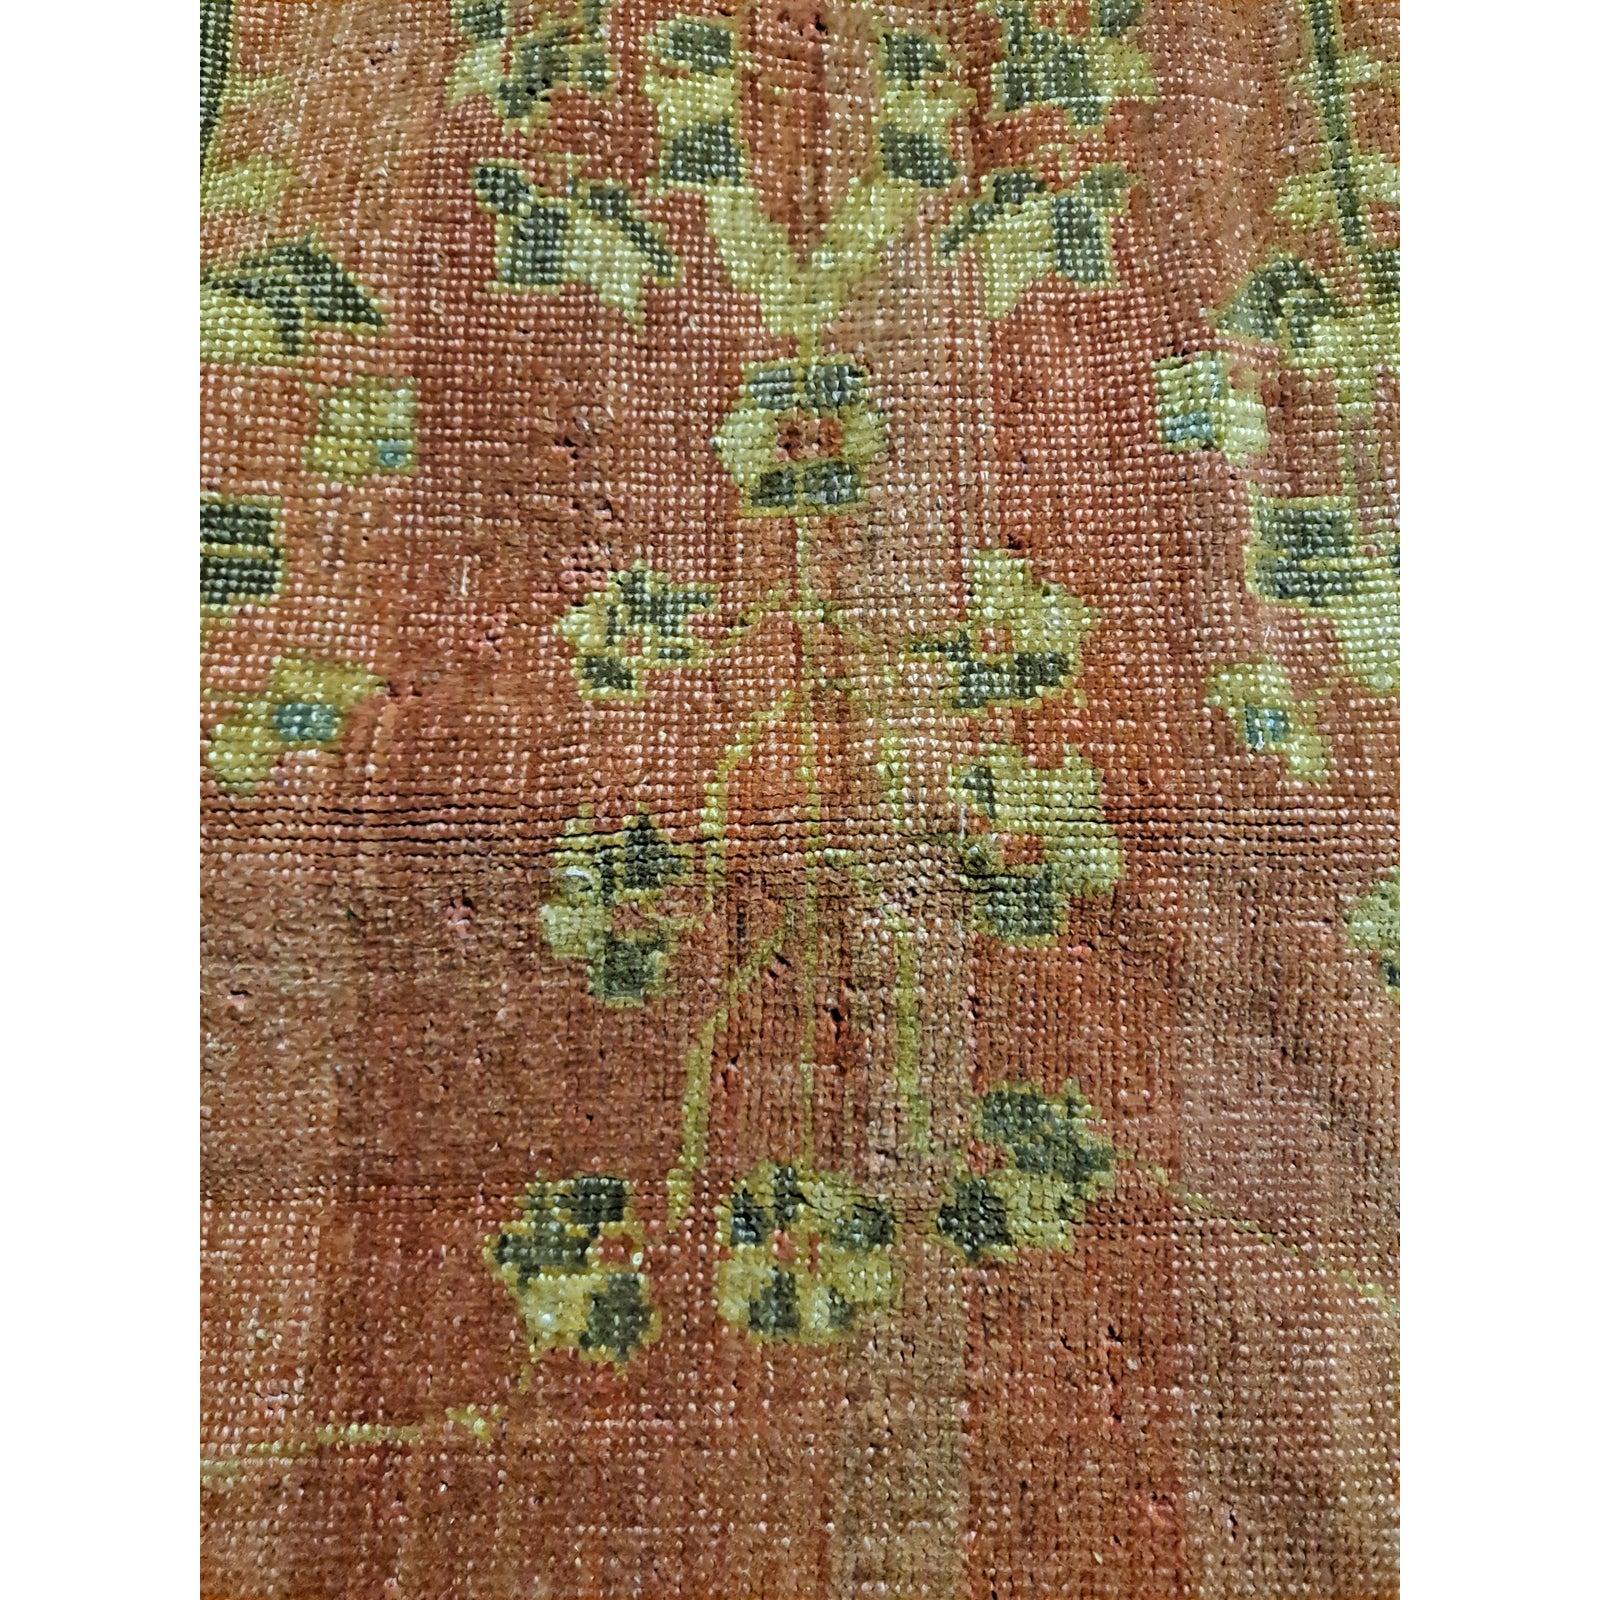 Beautiful handwoven wool Turkish Oushak rug

The rug shows ample fading, but still looks great and is a fine floor covering for a large space

10 feet 9 inches by 14 feet x 7.5 inches

Good vintage condition with ample fading

The images here show